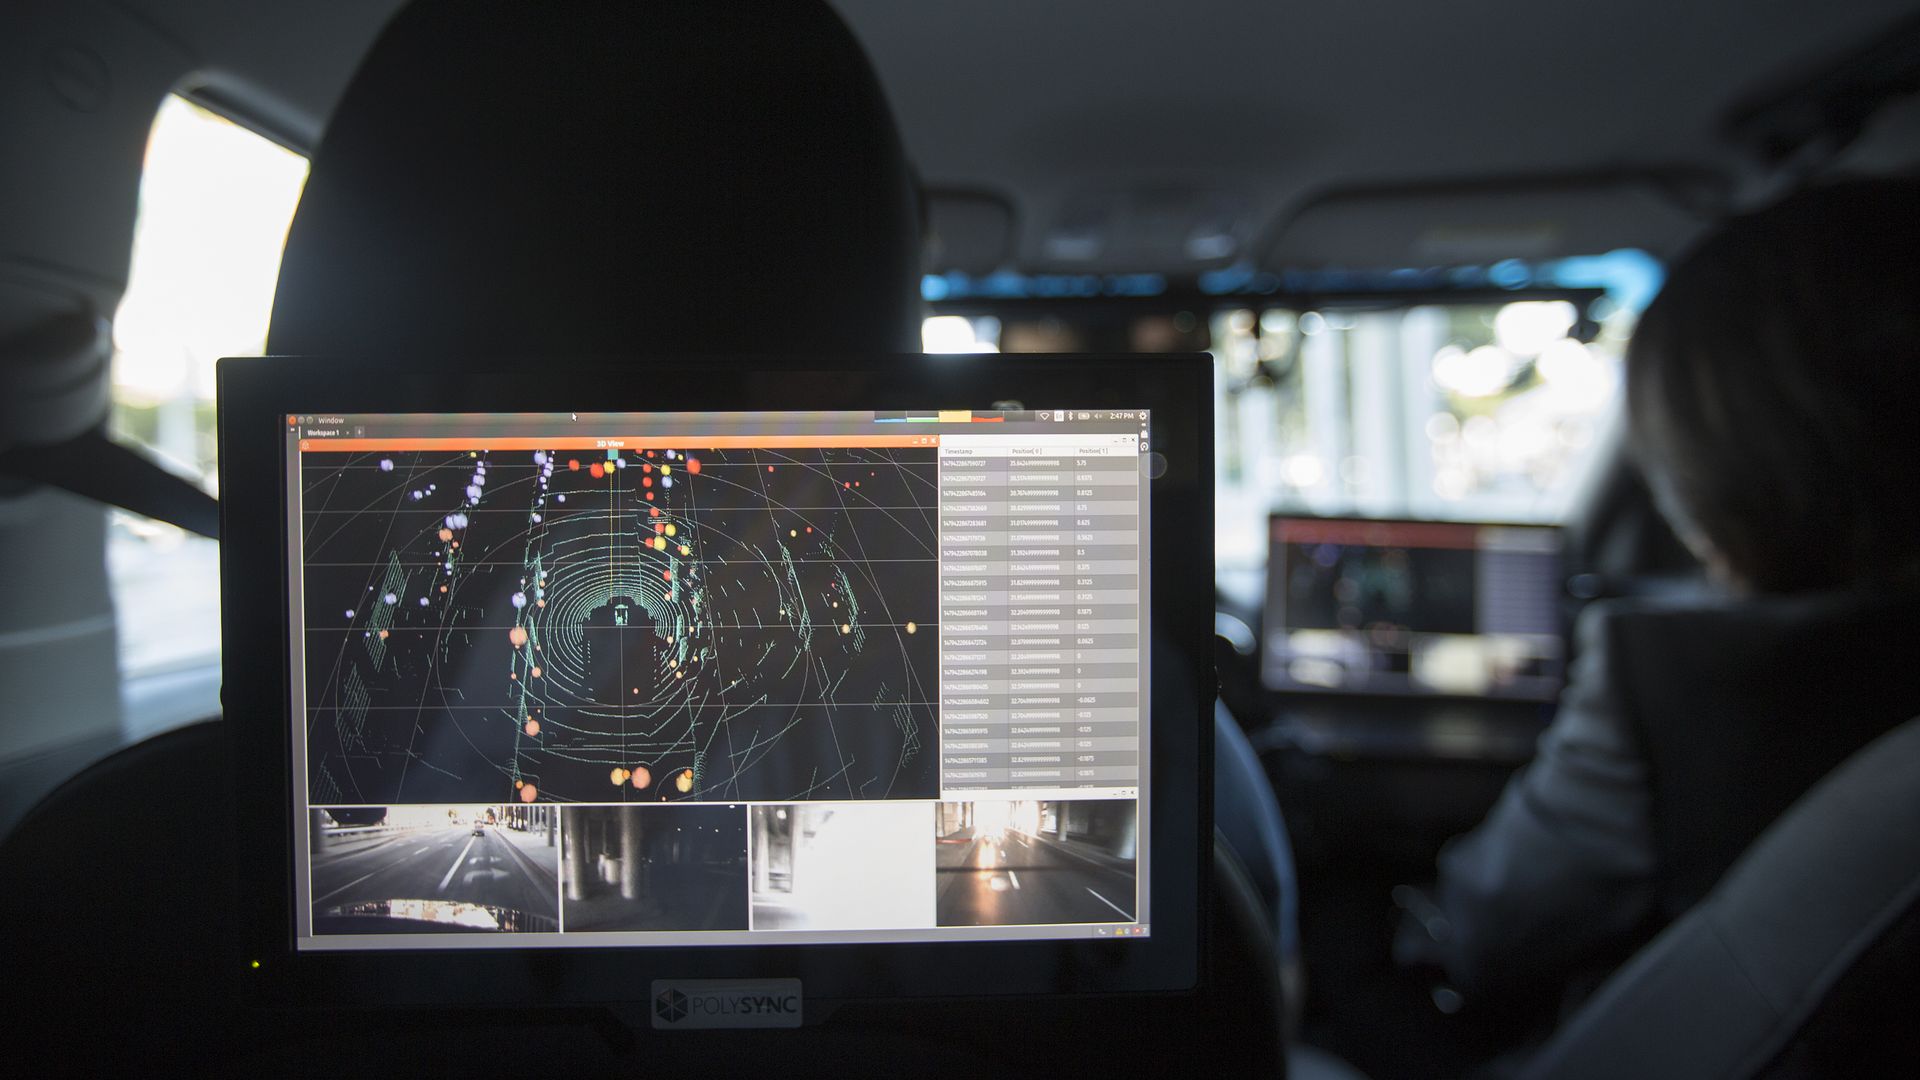 Photo of a backseat screen rendering a driverless car's surroundings 